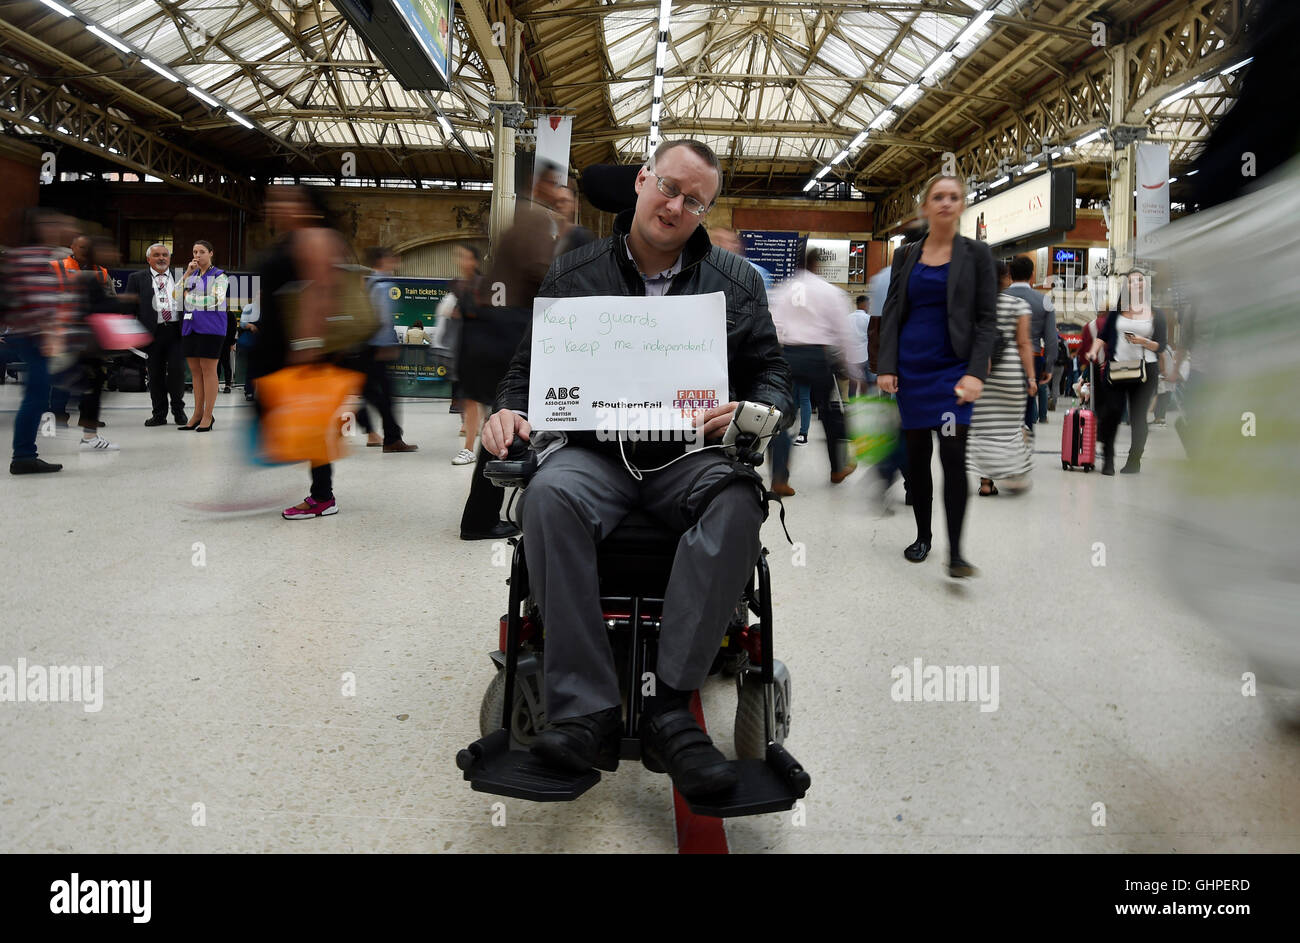 A protester holds a sign during a rail strike demonstration at London Victoria Station against the Southern Rail network, calling for a fare freeze and compensation. Stock Photo